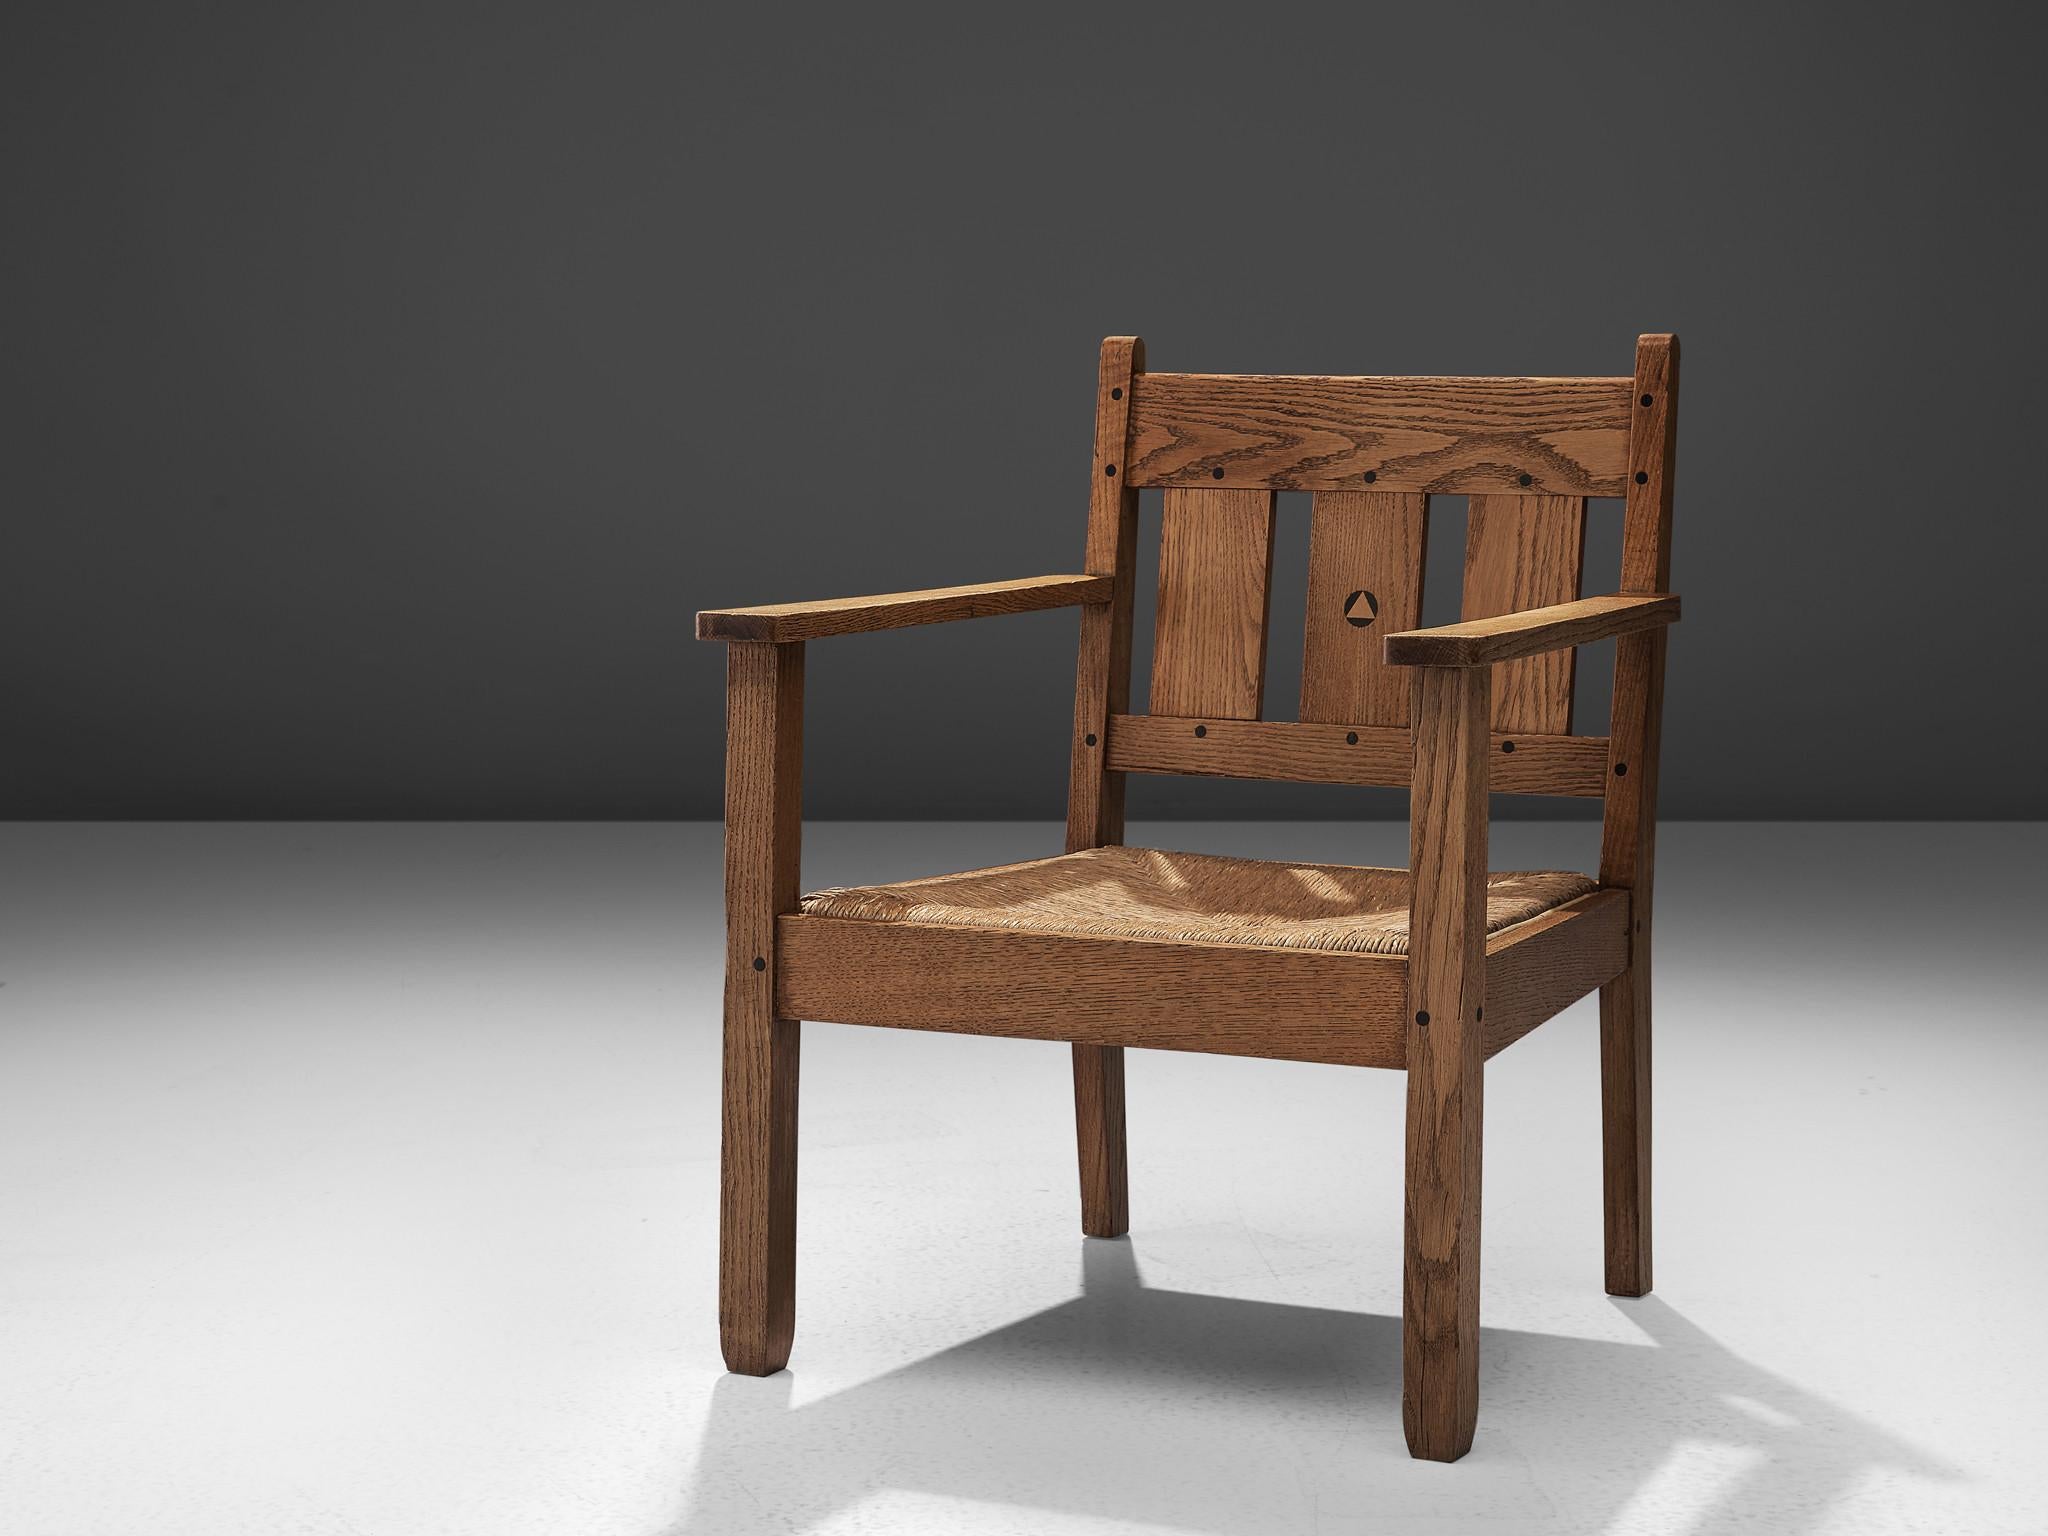 Armchair, oak, rope, the Netherlands, circa 1910

This early Dutch lounge chair is executed in oak and is designed by 't Binnenhuis and attributed to Jac van den Bosch. The chair is stately, solemn and designed by means of the principles of 't